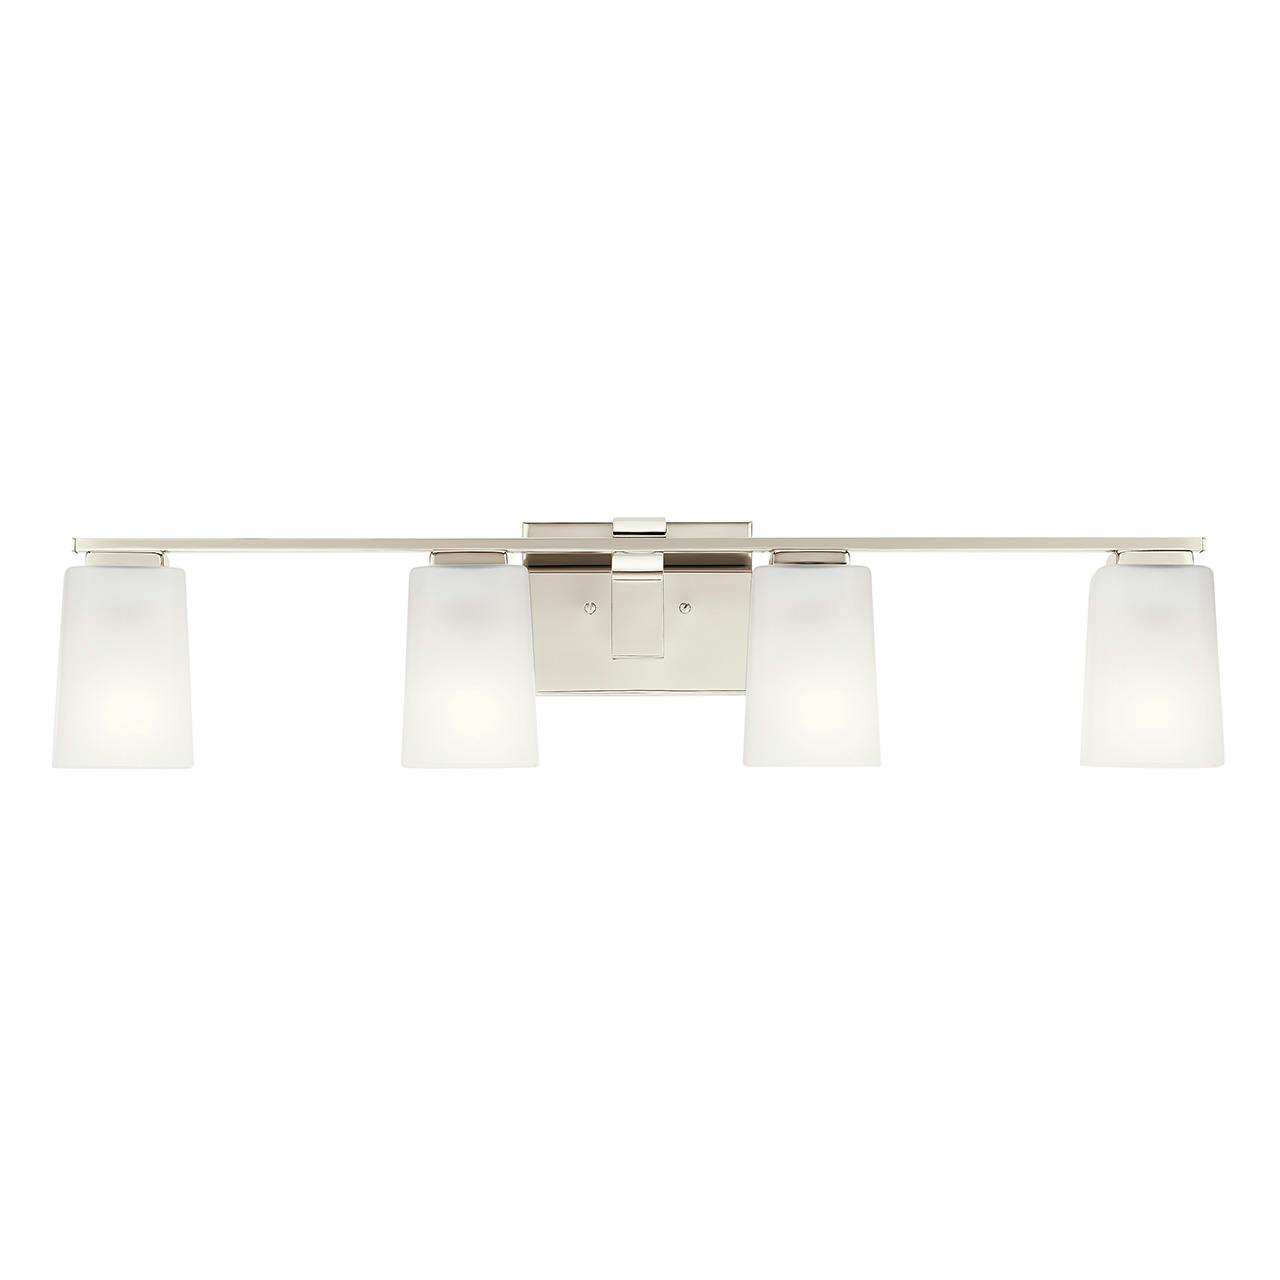 The Roehm 4 Light Vanity Light Nickel facing down on a white background